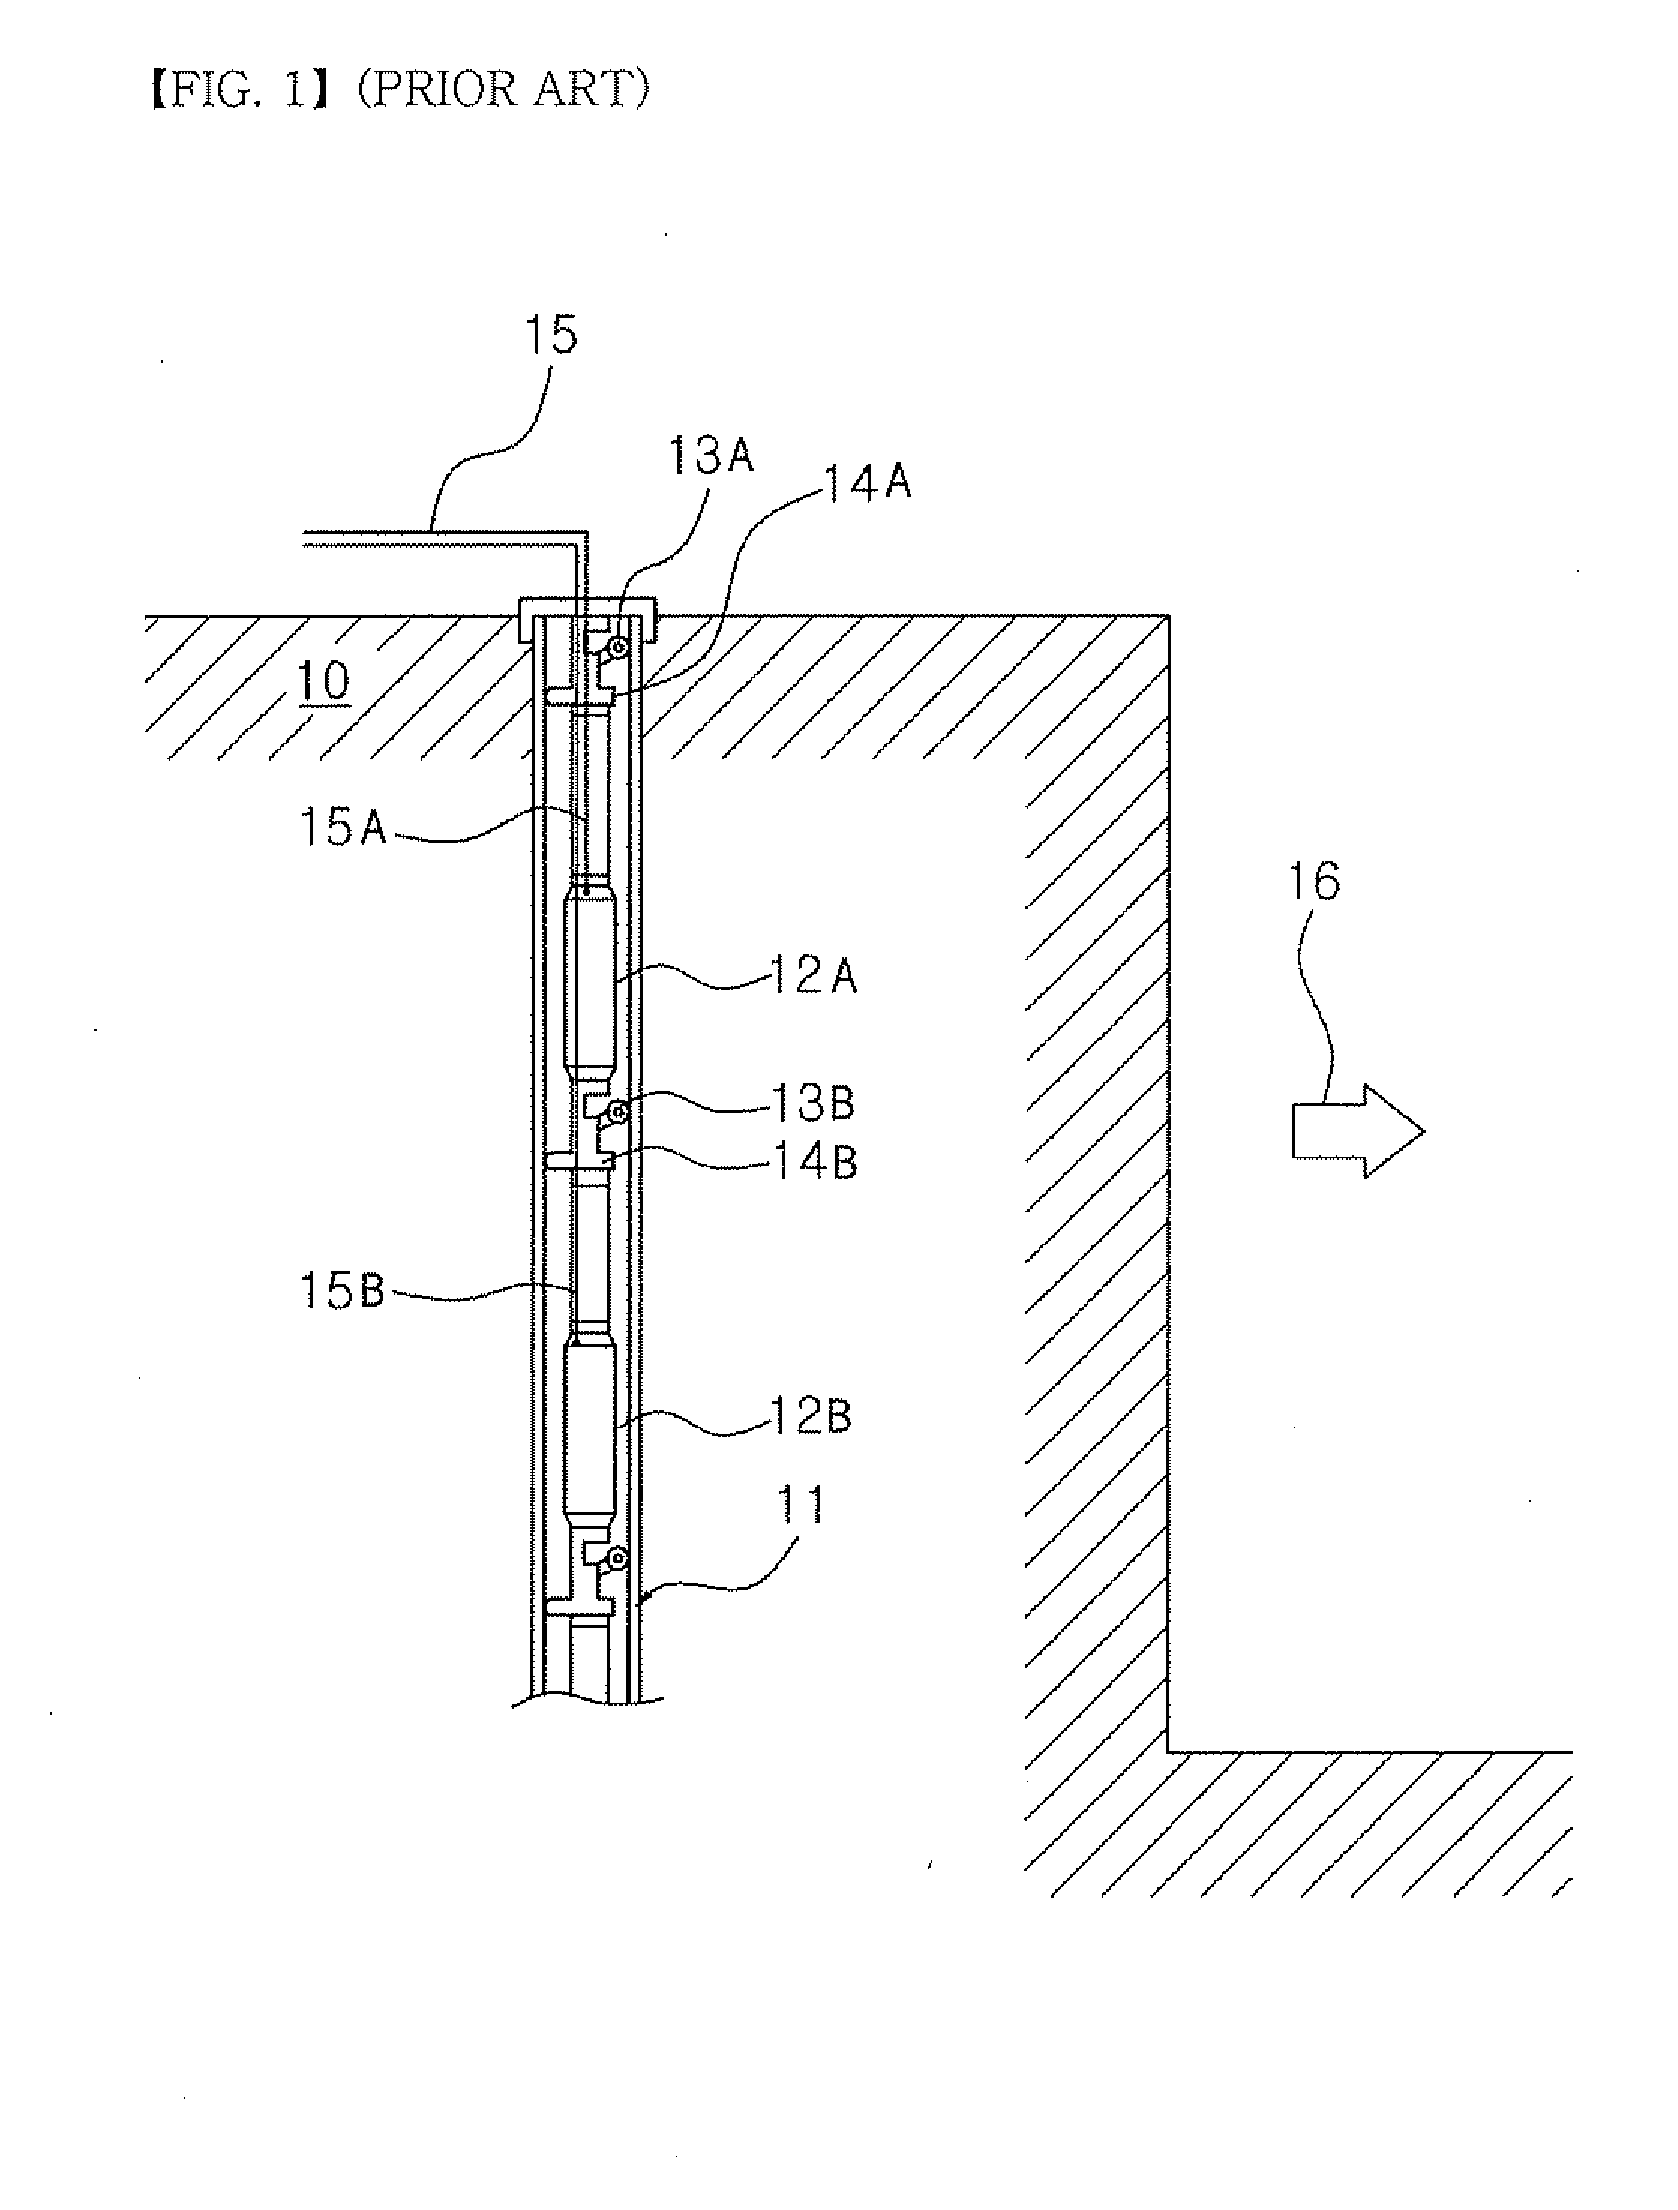 Inclinometer system